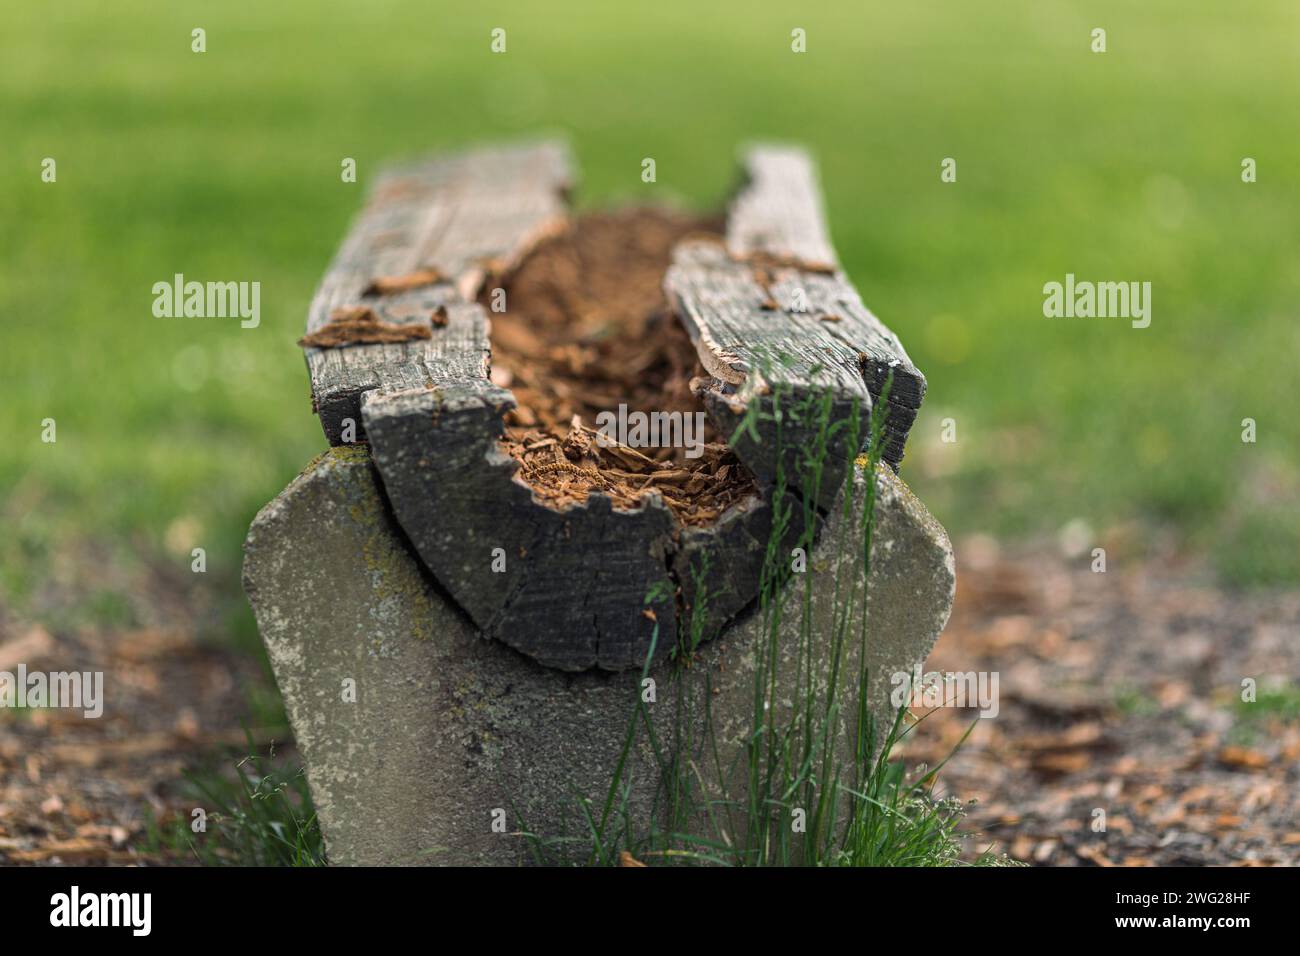 Eaten and destroyed wooden plank by termites in nature Stock Photo